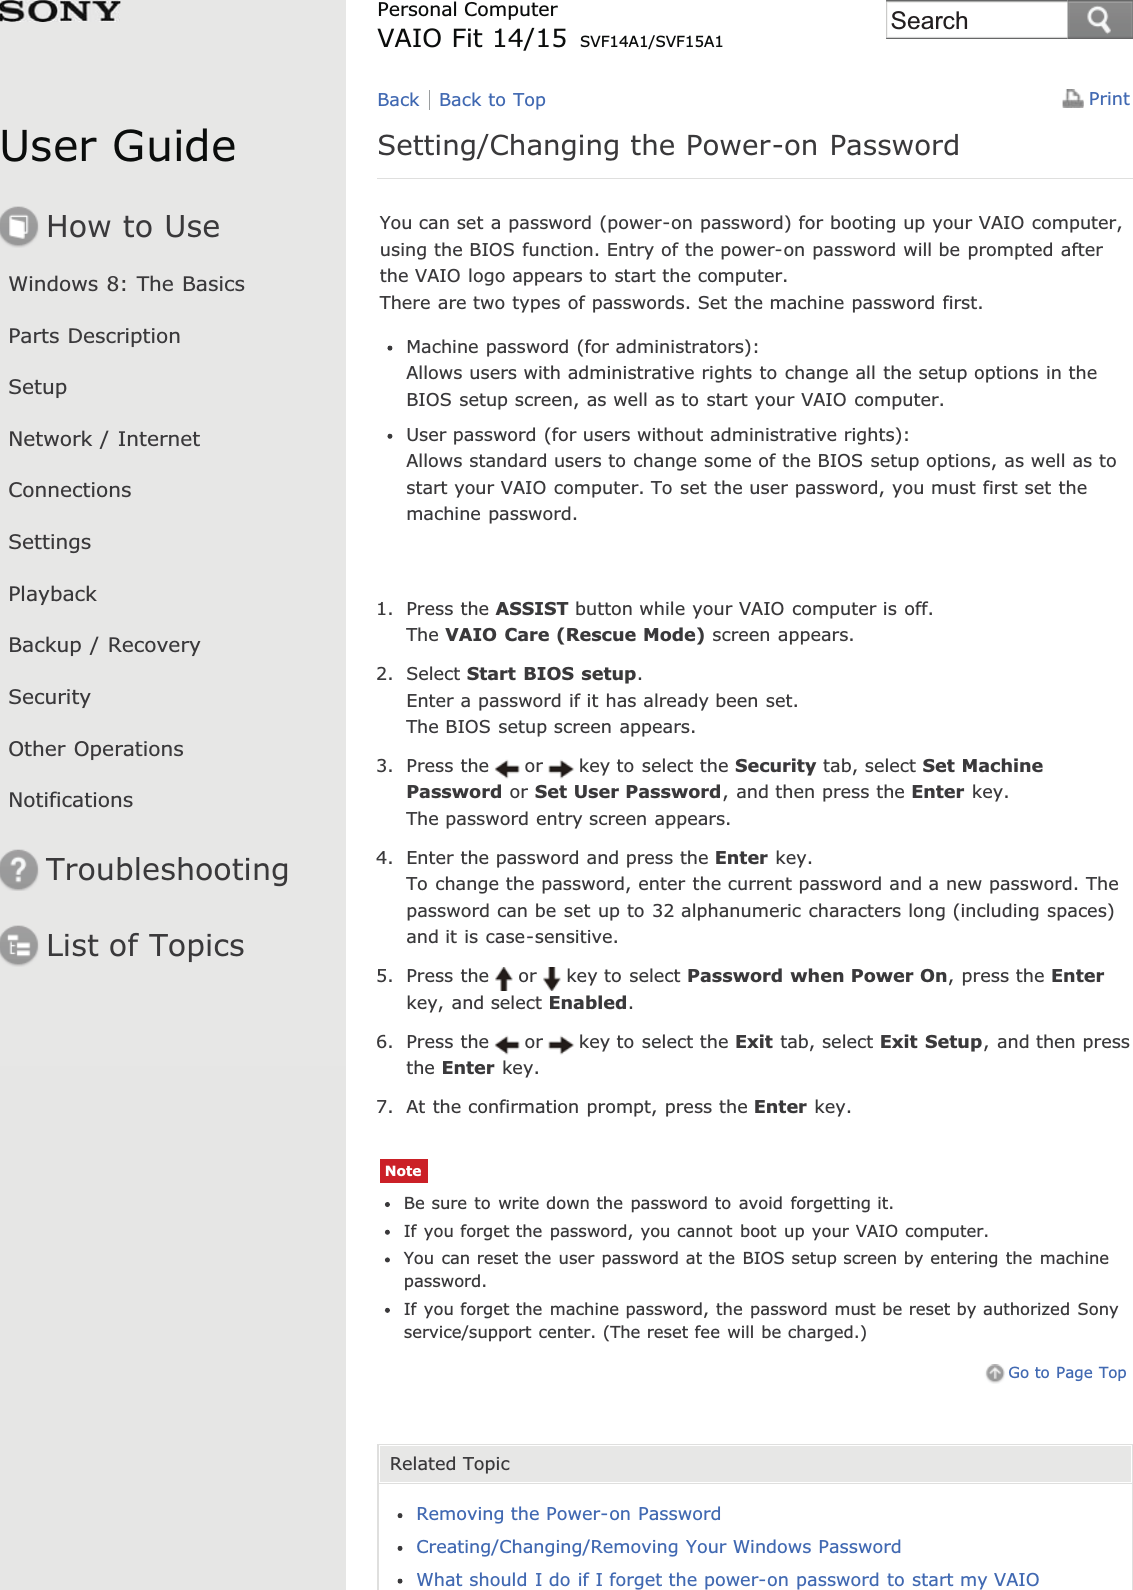 User GuideHow to UseWindows 8: The BasicsParts DescriptionSetupNetwork / InternetConnectionsSettingsPlaybackBackup / RecoverySecurityOther OperationsNotificationsTroubleshootingList of TopicsPrintPersonal ComputerVAIO Fit 14/15 SVF14A1/SVF15A1Setting/Changing the Power-on PasswordYou can set a password (power-on password) for booting up your VAIO computer,using the BIOS function. Entry of the power-on password will be prompted afterthe VAIO logo appears to start the computer.There are two types of passwords. Set the machine password first.Machine password (for administrators):Allows users with administrative rights to change all the setup options in theBIOS setup screen, as well as to start your VAIO computer.User password (for users without administrative rights):Allows standard users to change some of the BIOS setup options, as well as tostart your VAIO computer. To set the user password, you must first set themachine password.1. Press the ASSIST button while your VAIO computer is off.The VAIO Care (Rescue Mode) screen appears.2. Select Start BIOS setup.Enter a password if it has already been set.The BIOS setup screen appears.3. Press the or key to select the Security tab, select Set MachinePassword or Set User Password, and then press the Enter key.The password entry screen appears.4. Enter the password and press the Enter key.To change the password, enter the current password and a new password. Thepassword can be set up to 32 alphanumeric characters long (including spaces)and it is case-sensitive.5. Press the or key to select Password when Power On, press the Enterkey, and select Enabled.6. Press the or key to select the Exit tab, select Exit Setup, and then pressthe Enter key.7. At the confirmation prompt, press the Enter key.NoteBe sure to write down the password to avoid forgetting it.If you forget the password, you cannot boot up your VAIO computer.You can reset the user password at the BIOS setup screen by entering the machinepassword.If you forget the machine password, the password must be reset by authorized Sonyservice/support center. (The reset fee will be charged.)Go to Page TopRelated TopicRemoving the Power-on PasswordCreating/Changing/Removing Your Windows PasswordWhat should I do if I forget the power-on password to start my VAIOBack Back to TopSearch